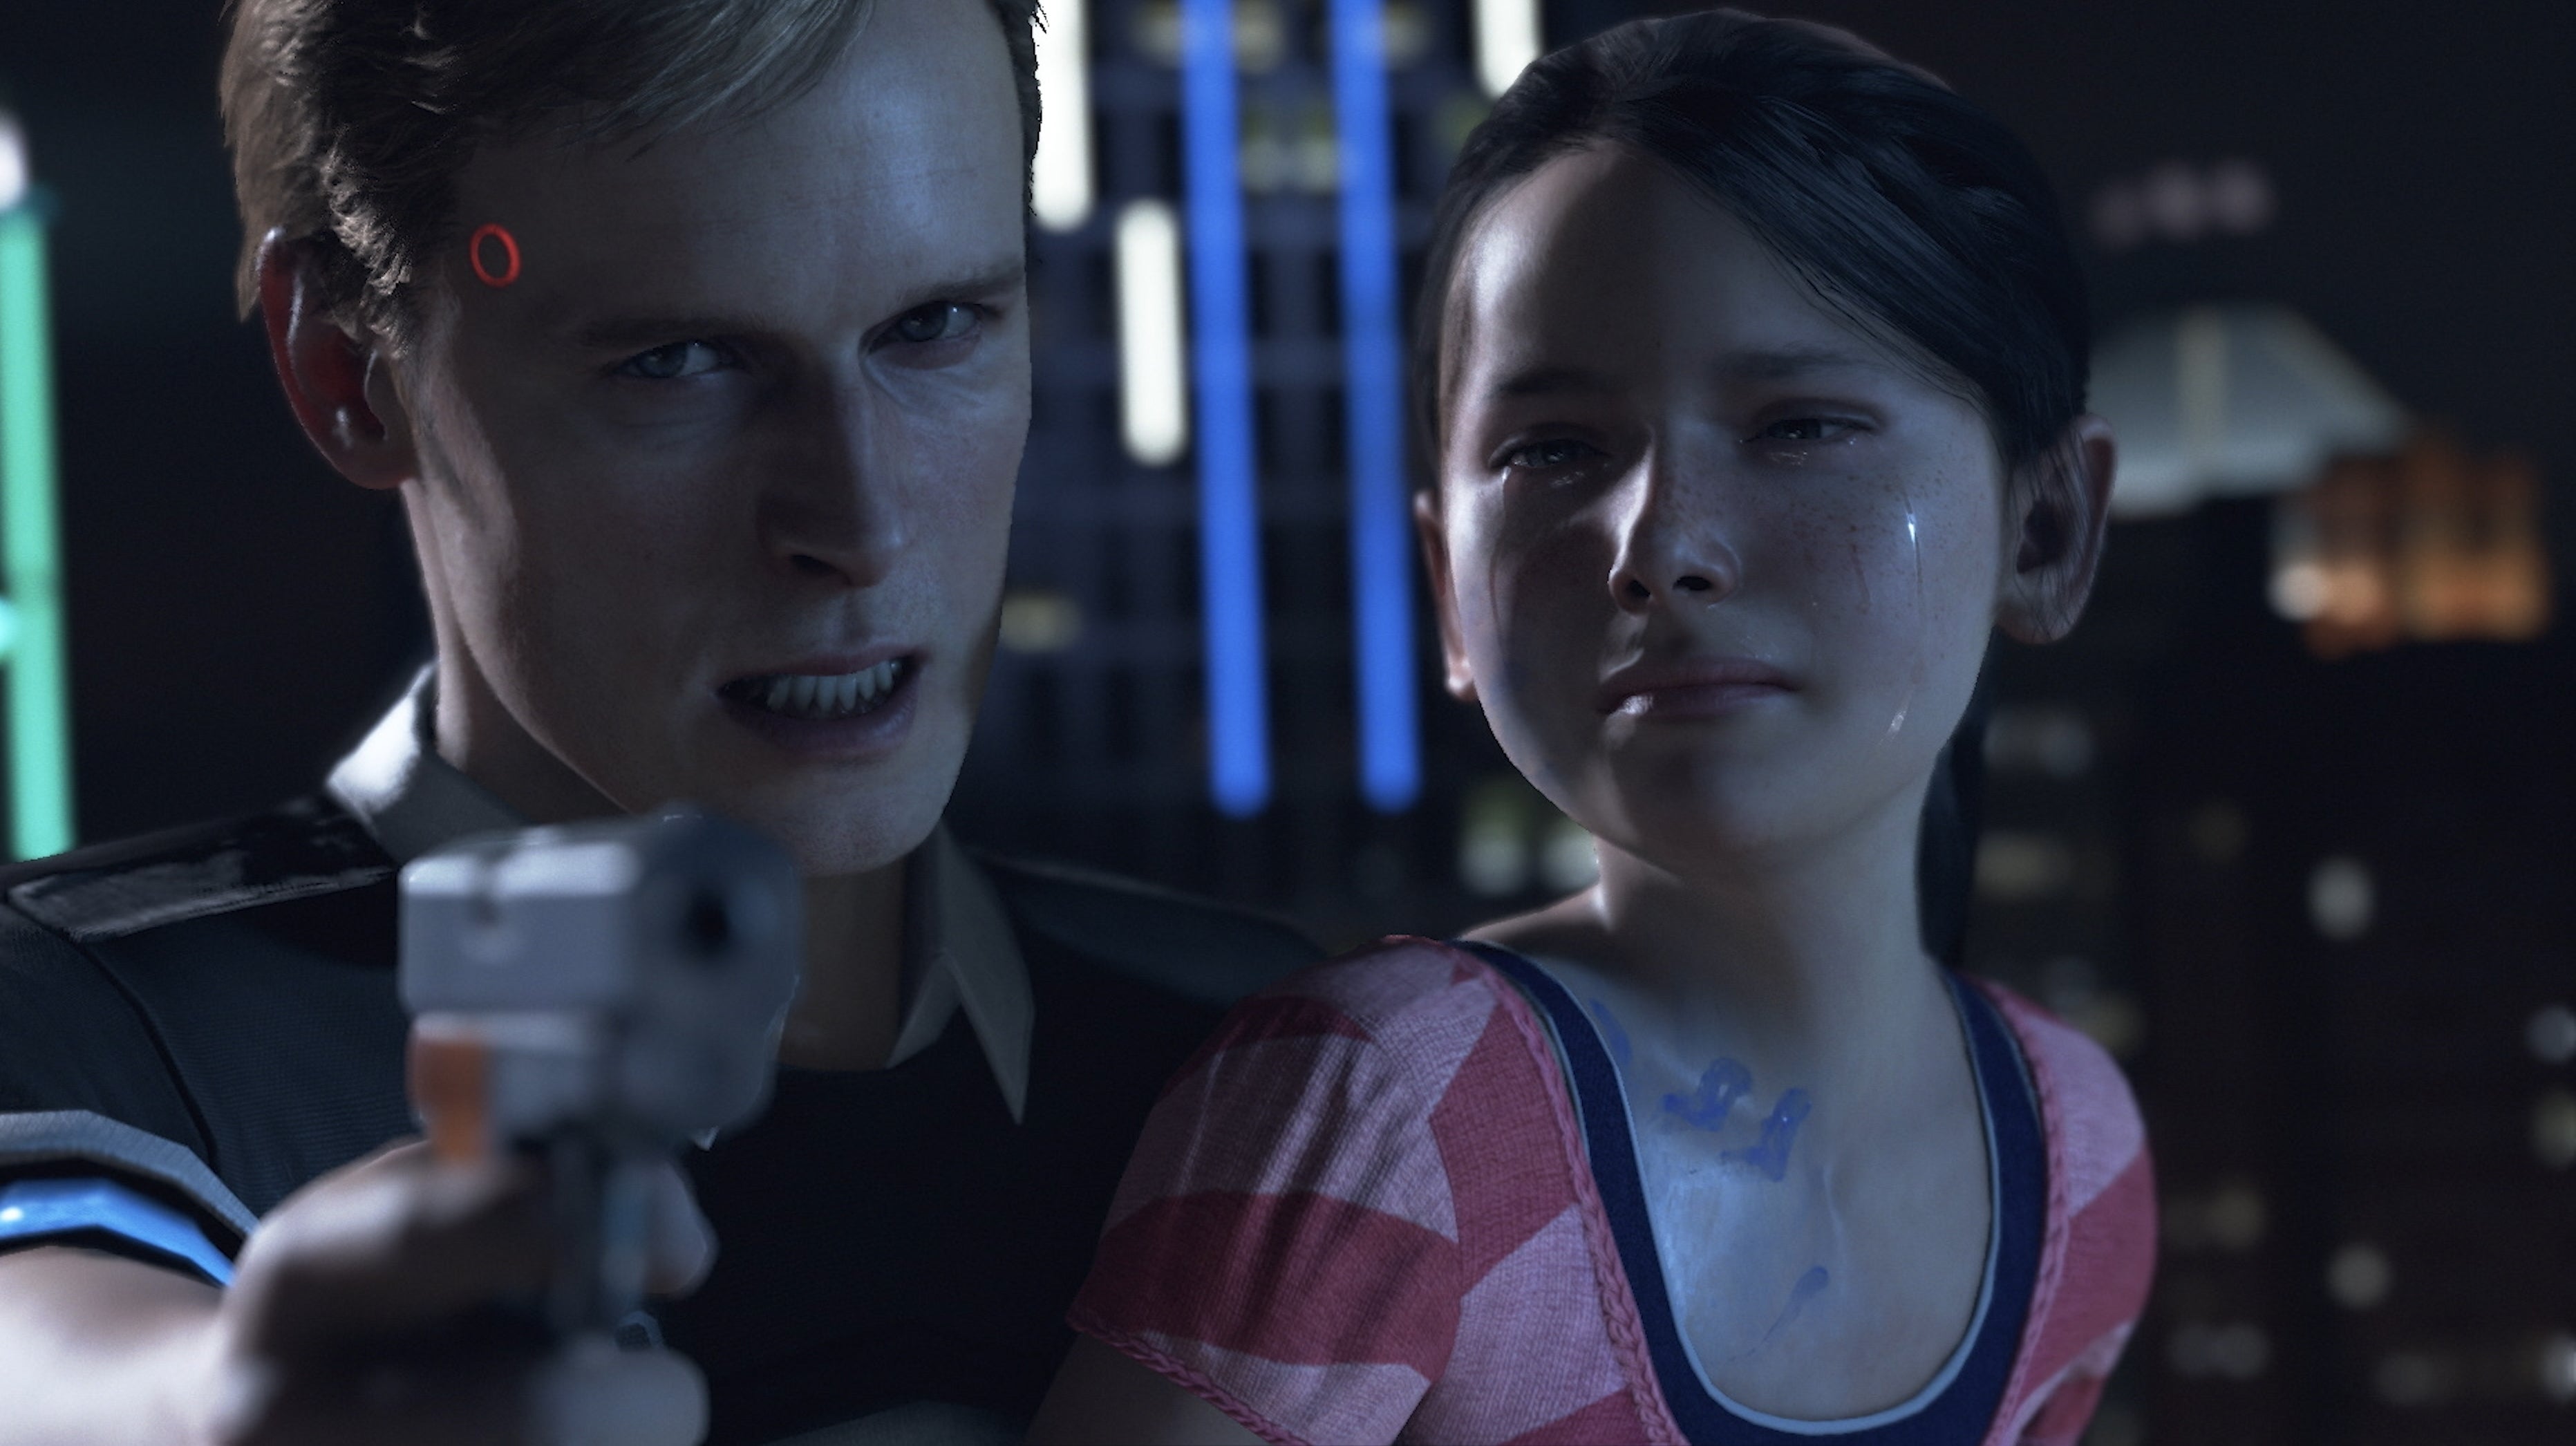 Image for Detroit: Become Human, Heavy Rain and Beyond: Two Souls are all coming to PC